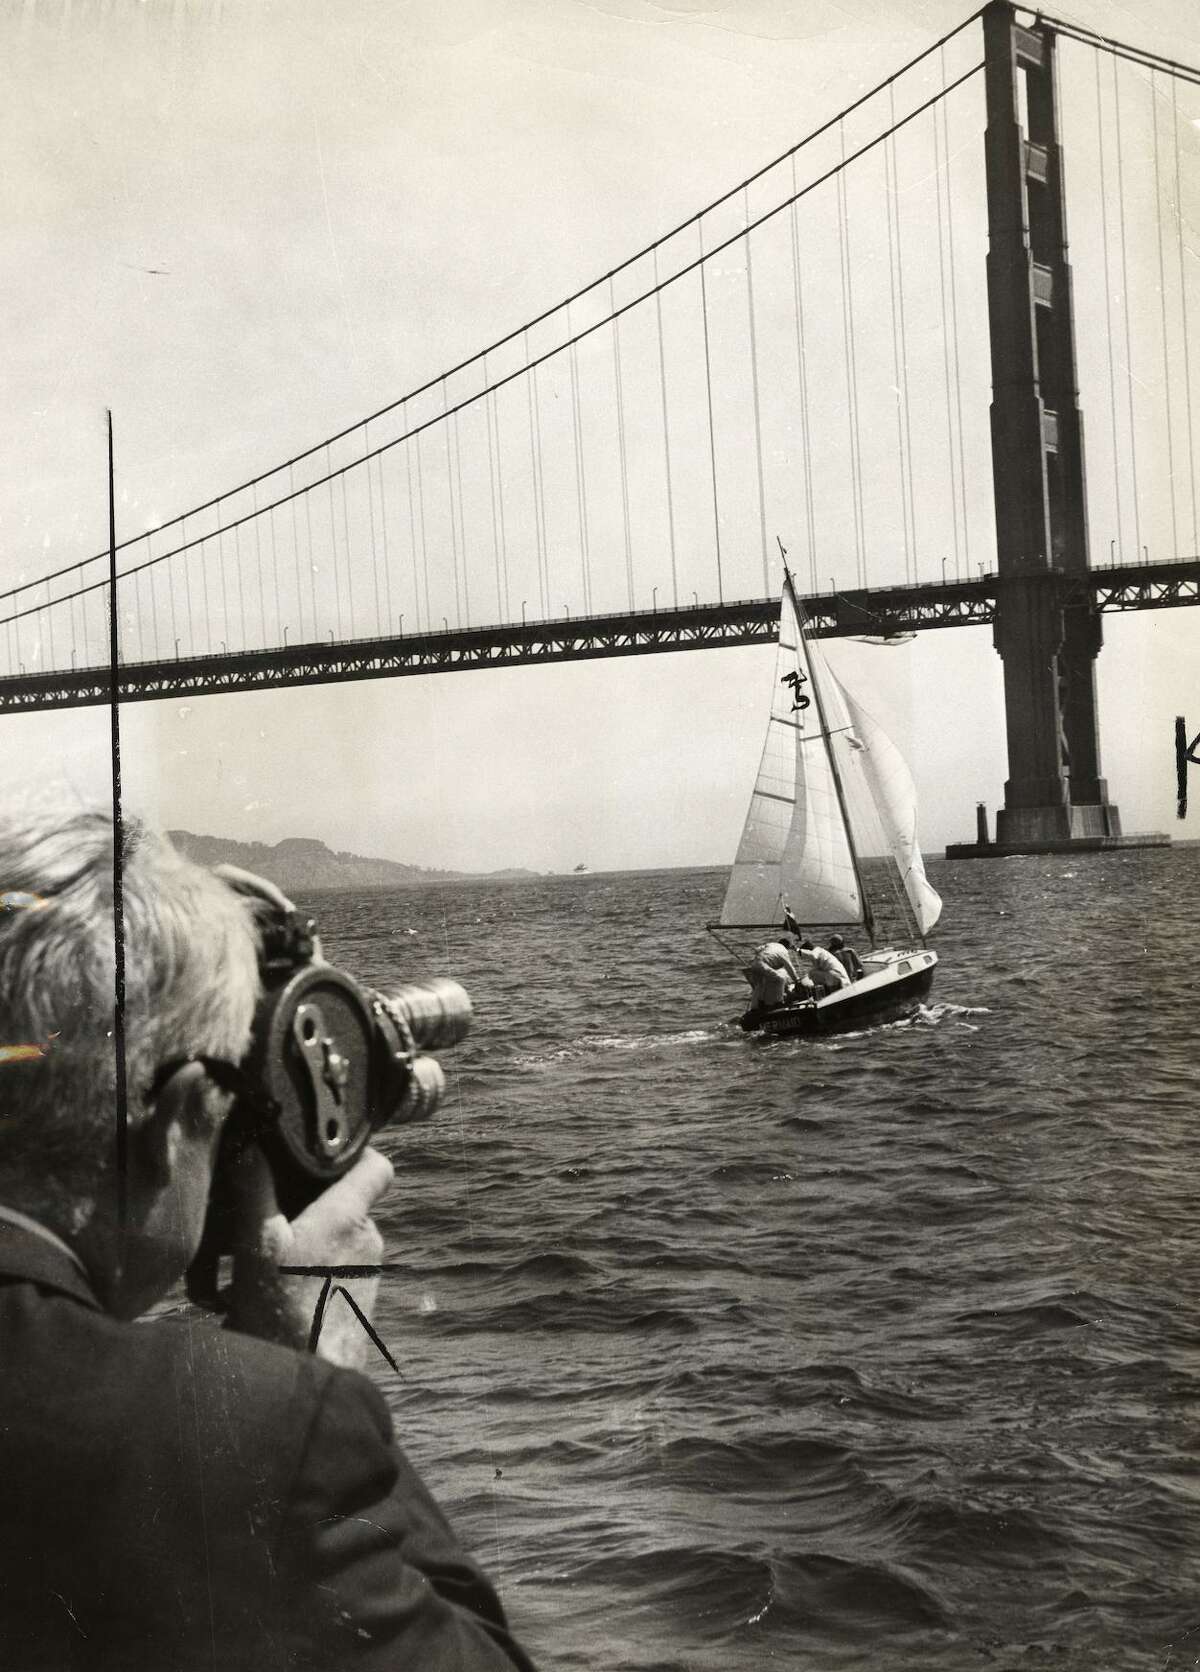 Kenichi Horie sailed from Osaka to San Francisco alone on a small sailboat in 1962.